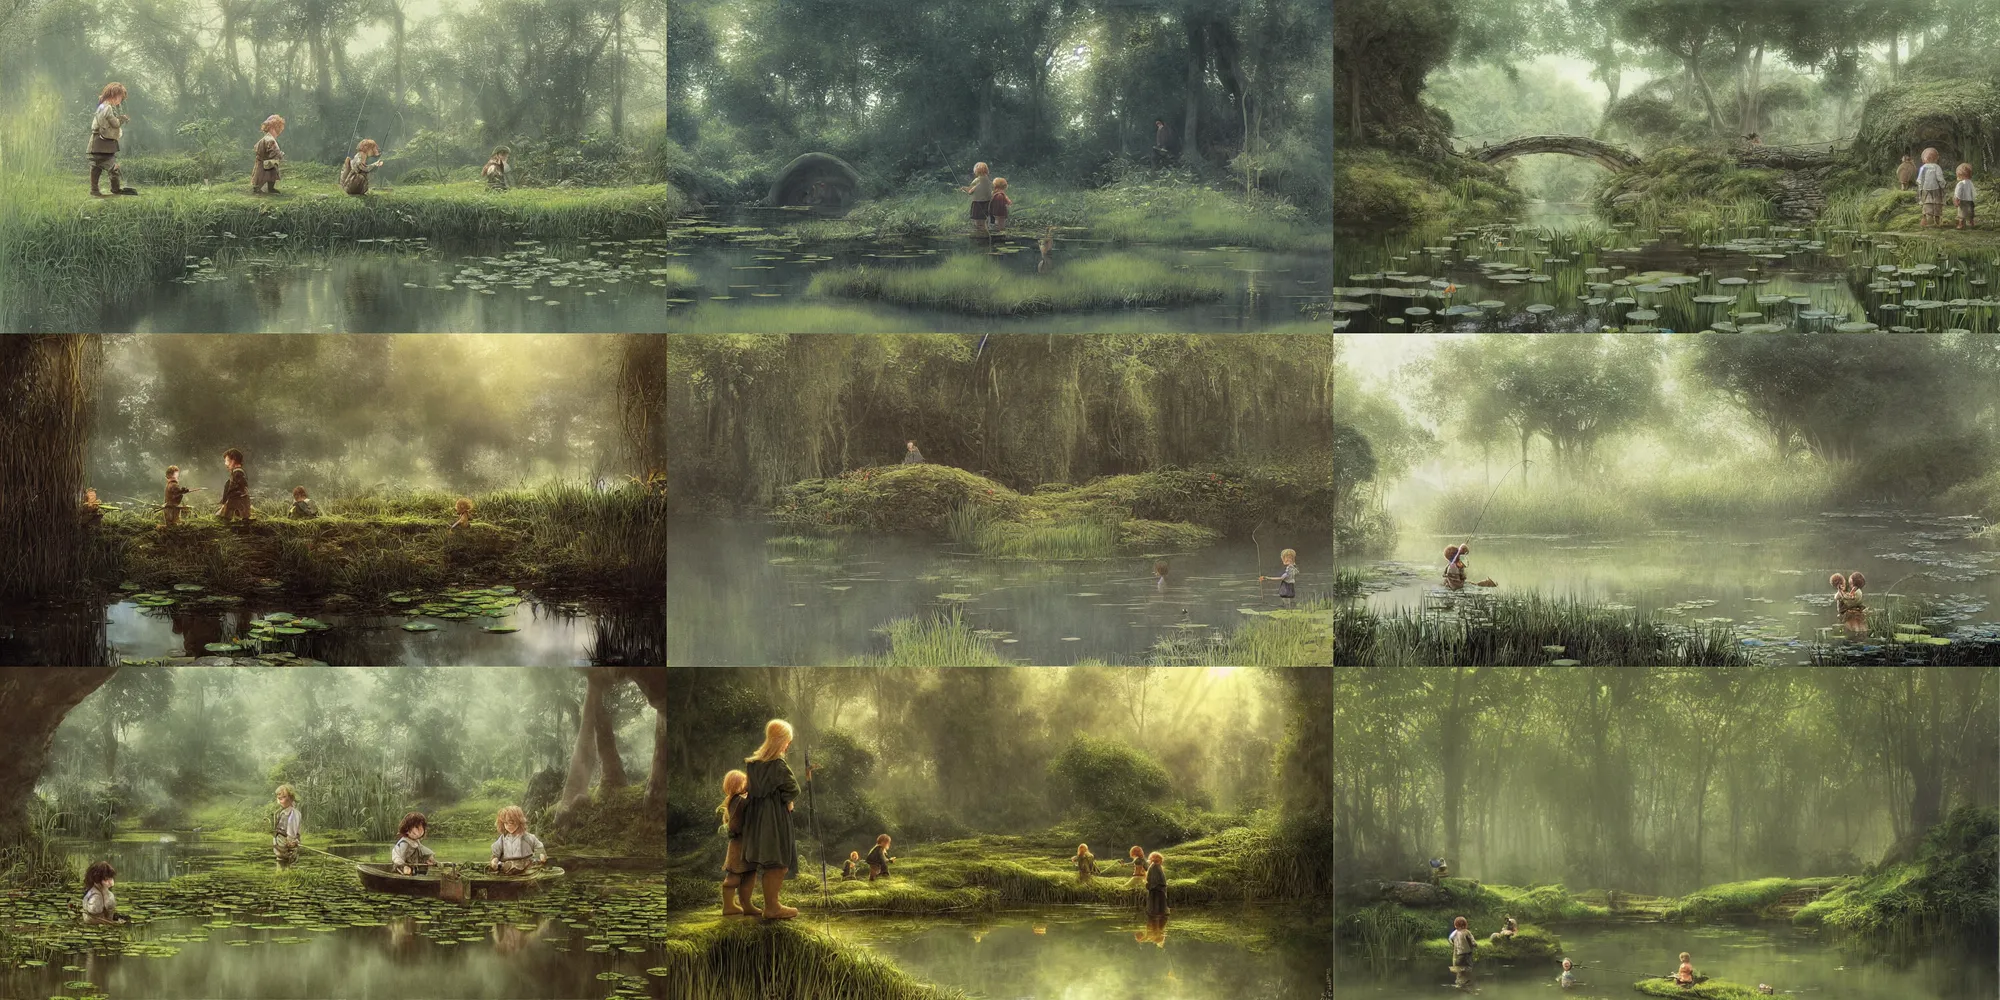 Prompt: two hobbit children fishing trip to a mirror - like pond covered with lotus flowers!!, by alan lee, dark foggy forest background, sunlight filtering through the trees, fishing poles!, digital art, art station.